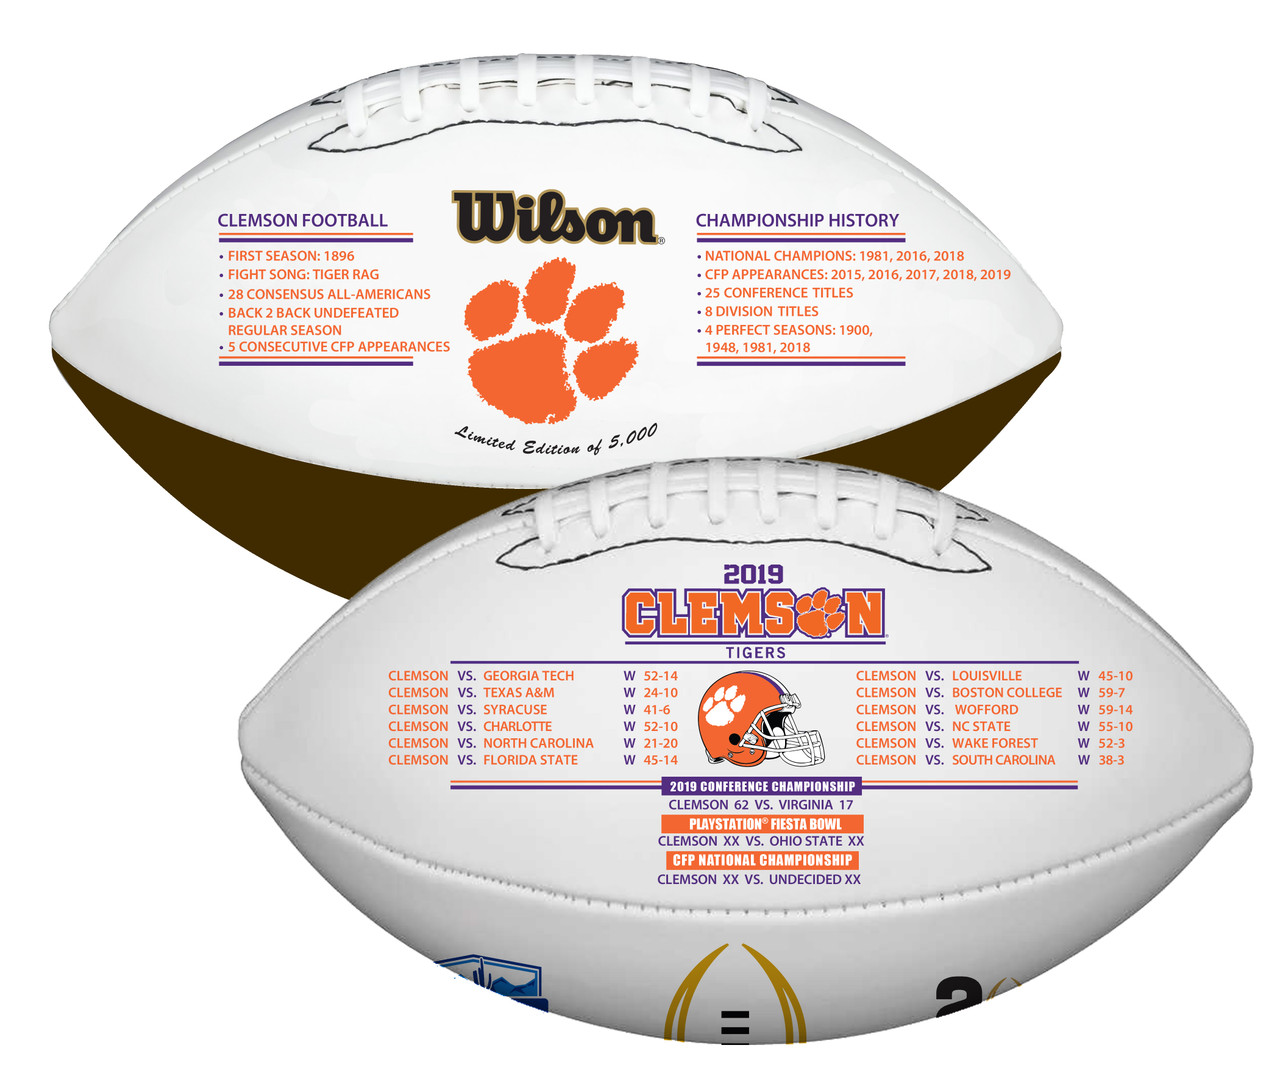 Clemson Football: What's in a number? Tigers get new jersey numbers